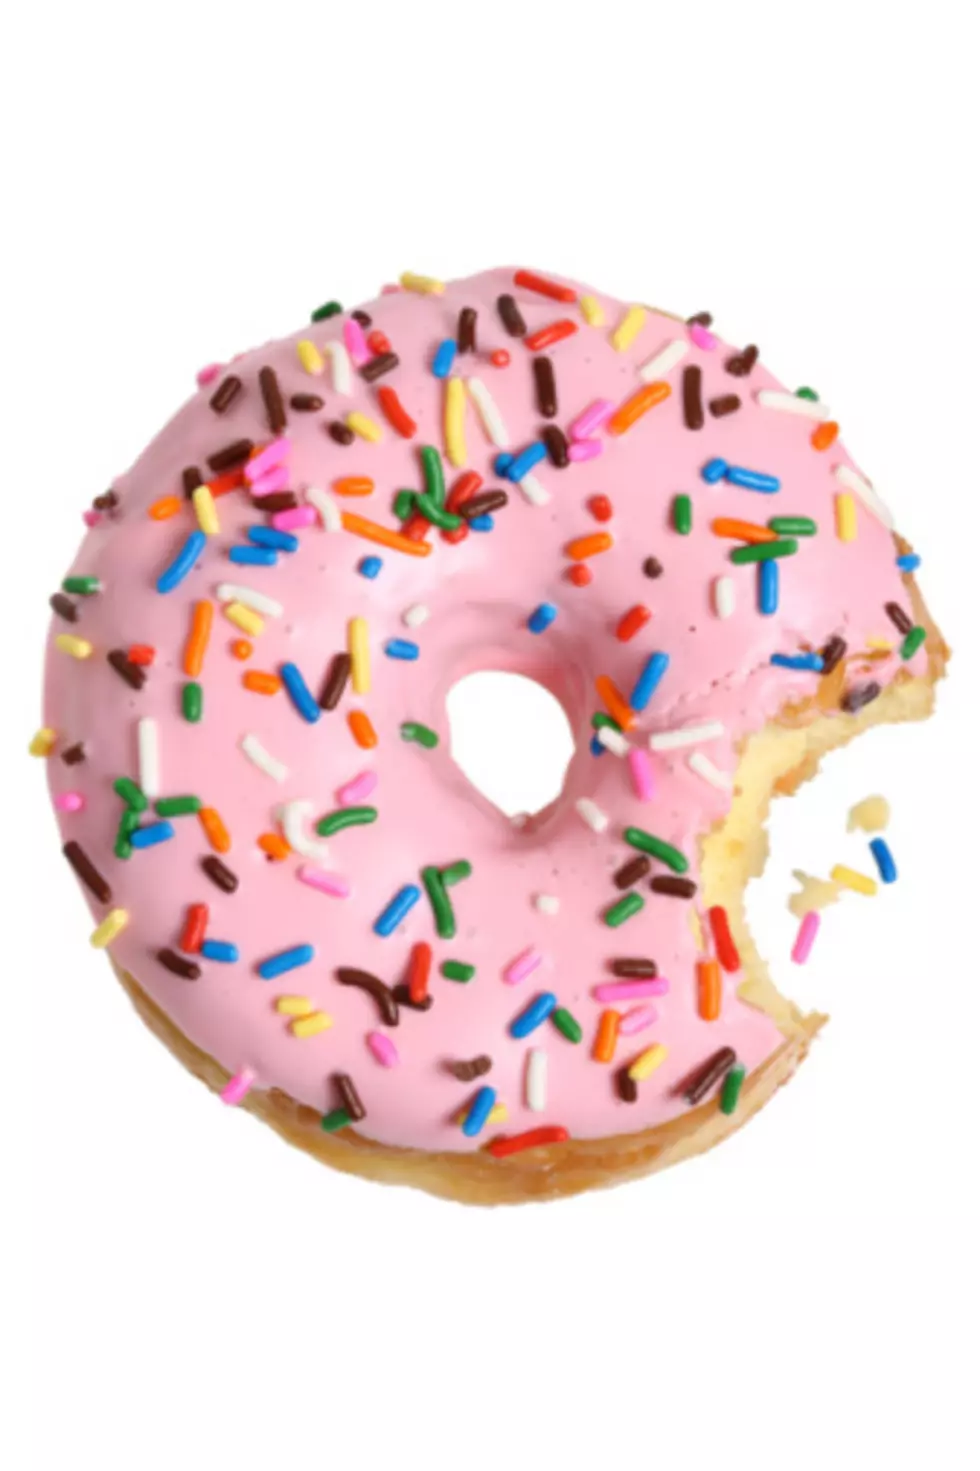 Say &#8220;What!?&#8221;-Wyoming Student Fined for Stealing Doughnuts